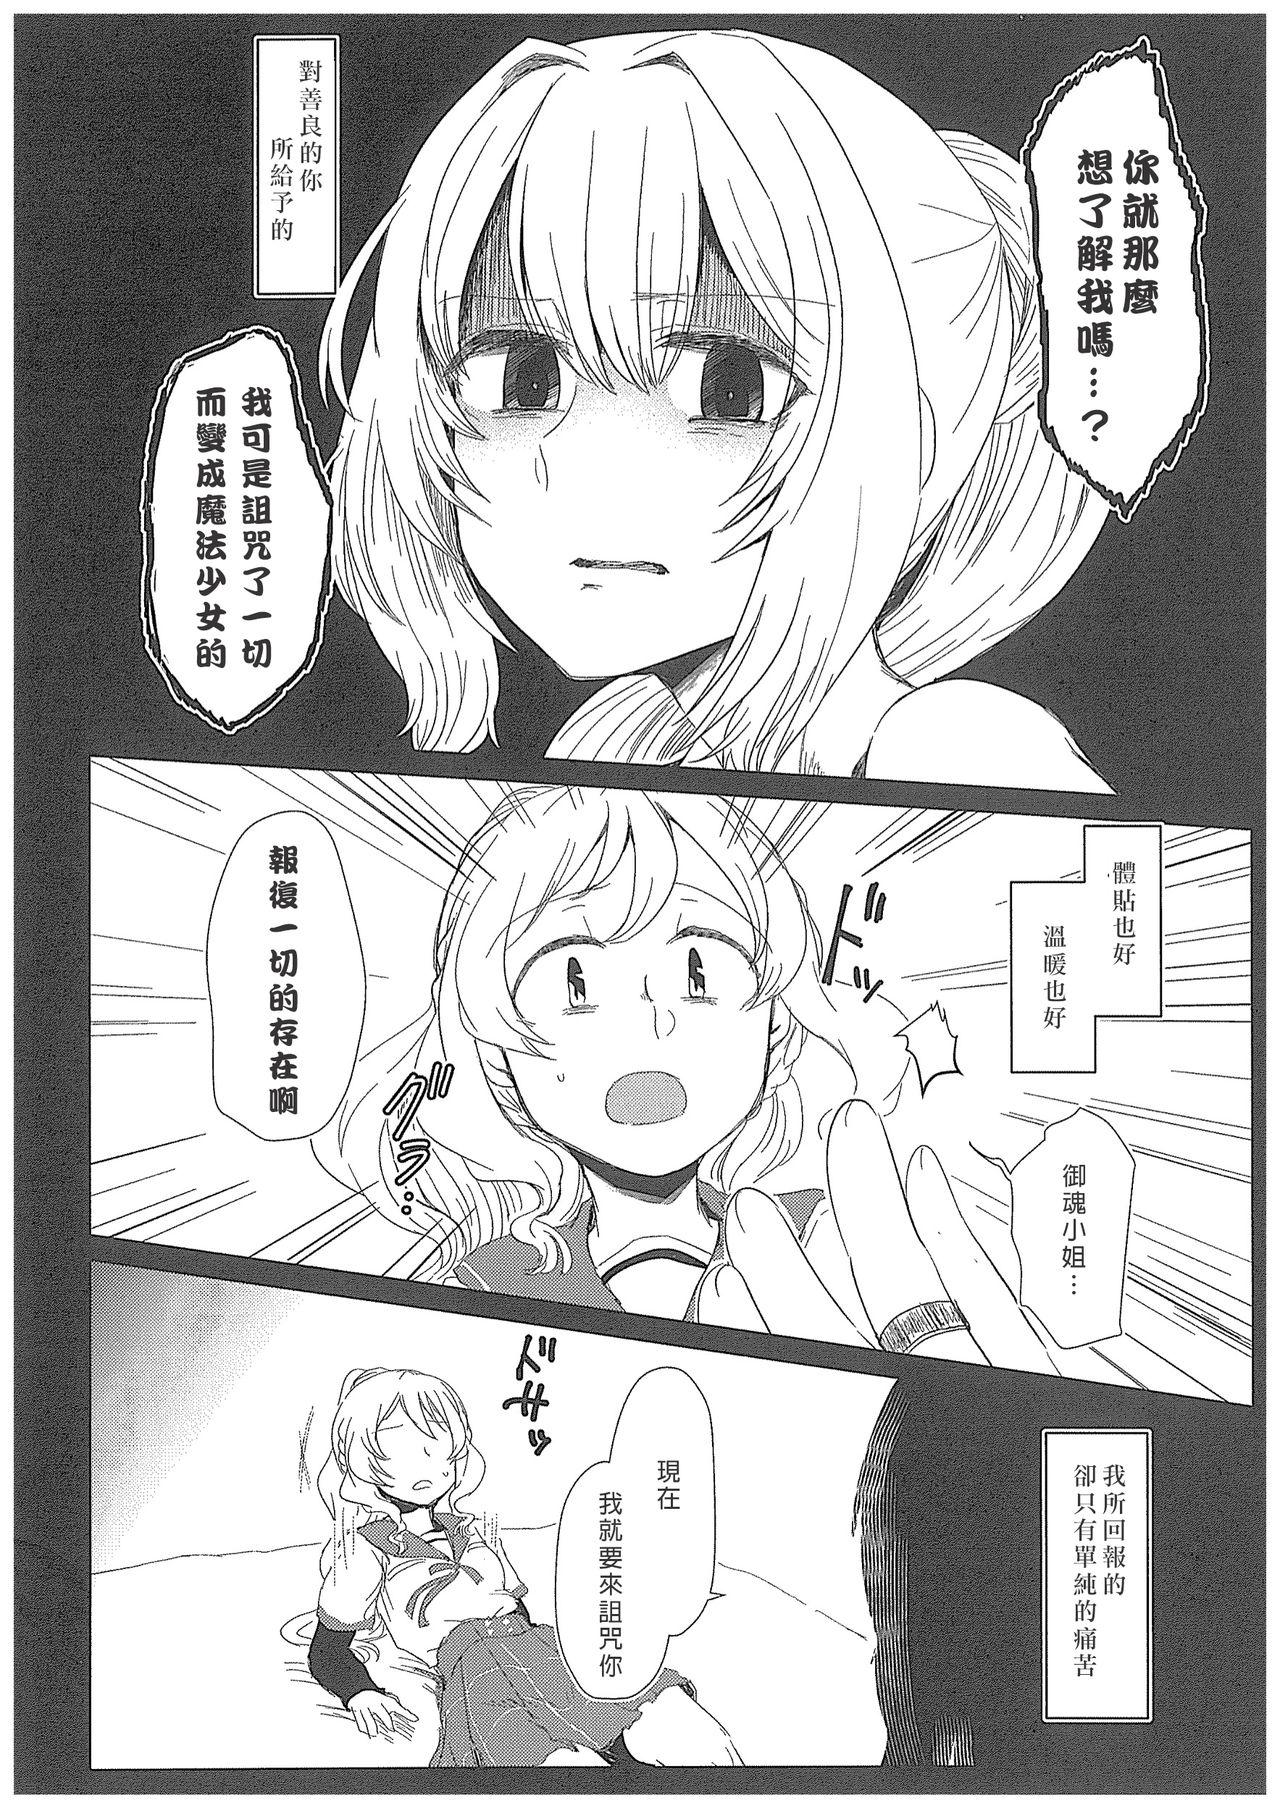 Amateur Blowjob From nothing,nothing comes|漢堡牛排不能無中生有 - Puella magi madoka magica side story magia record Time - Page 11